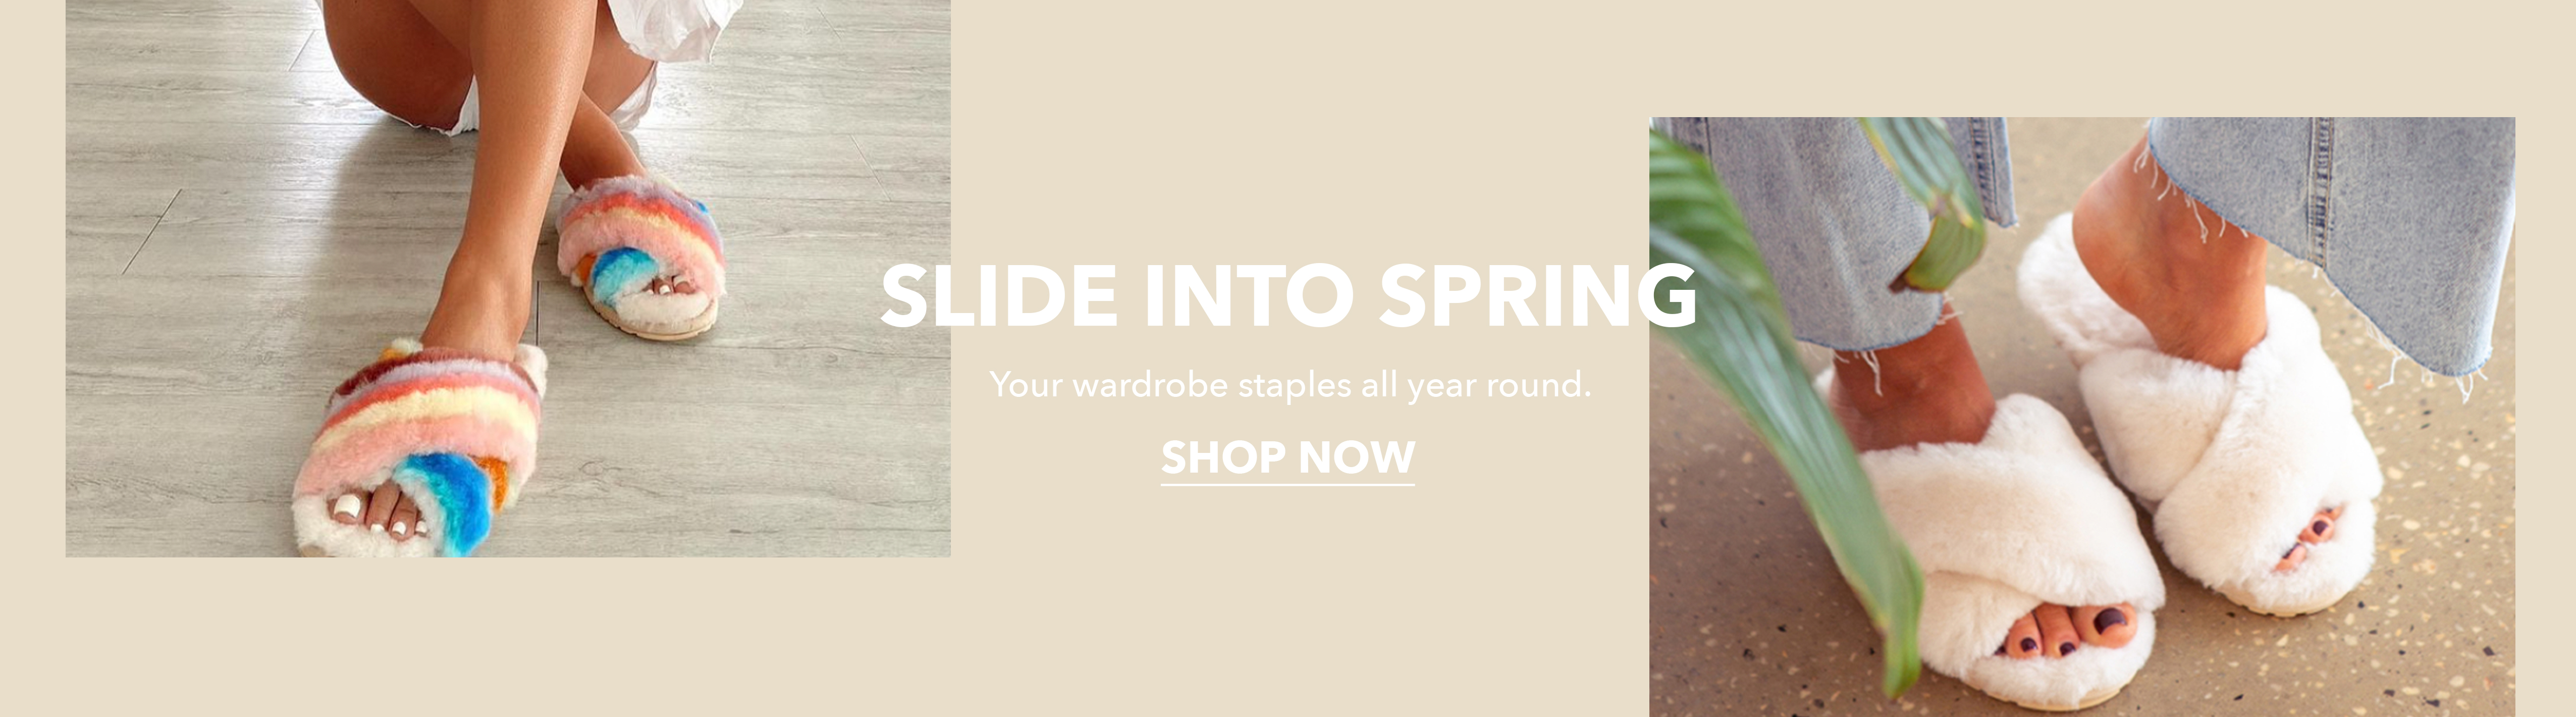 Slide into Spring. Your wardrobe staples all year round. Shop Now.